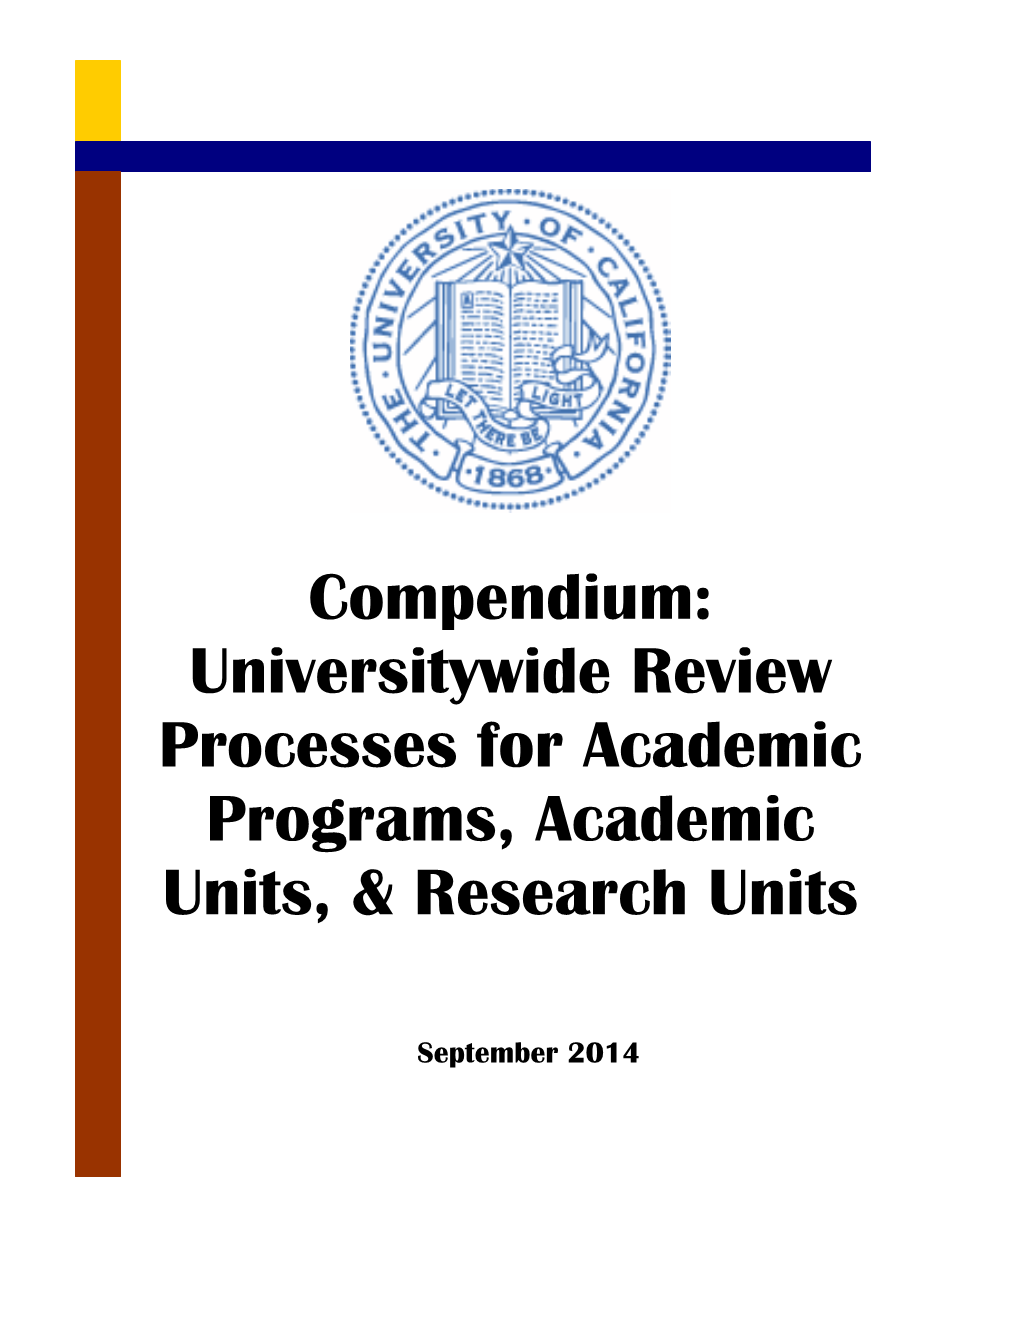 Compendium: Universitywide Review Processes for Academic Programs, Academic Units, & Research Units